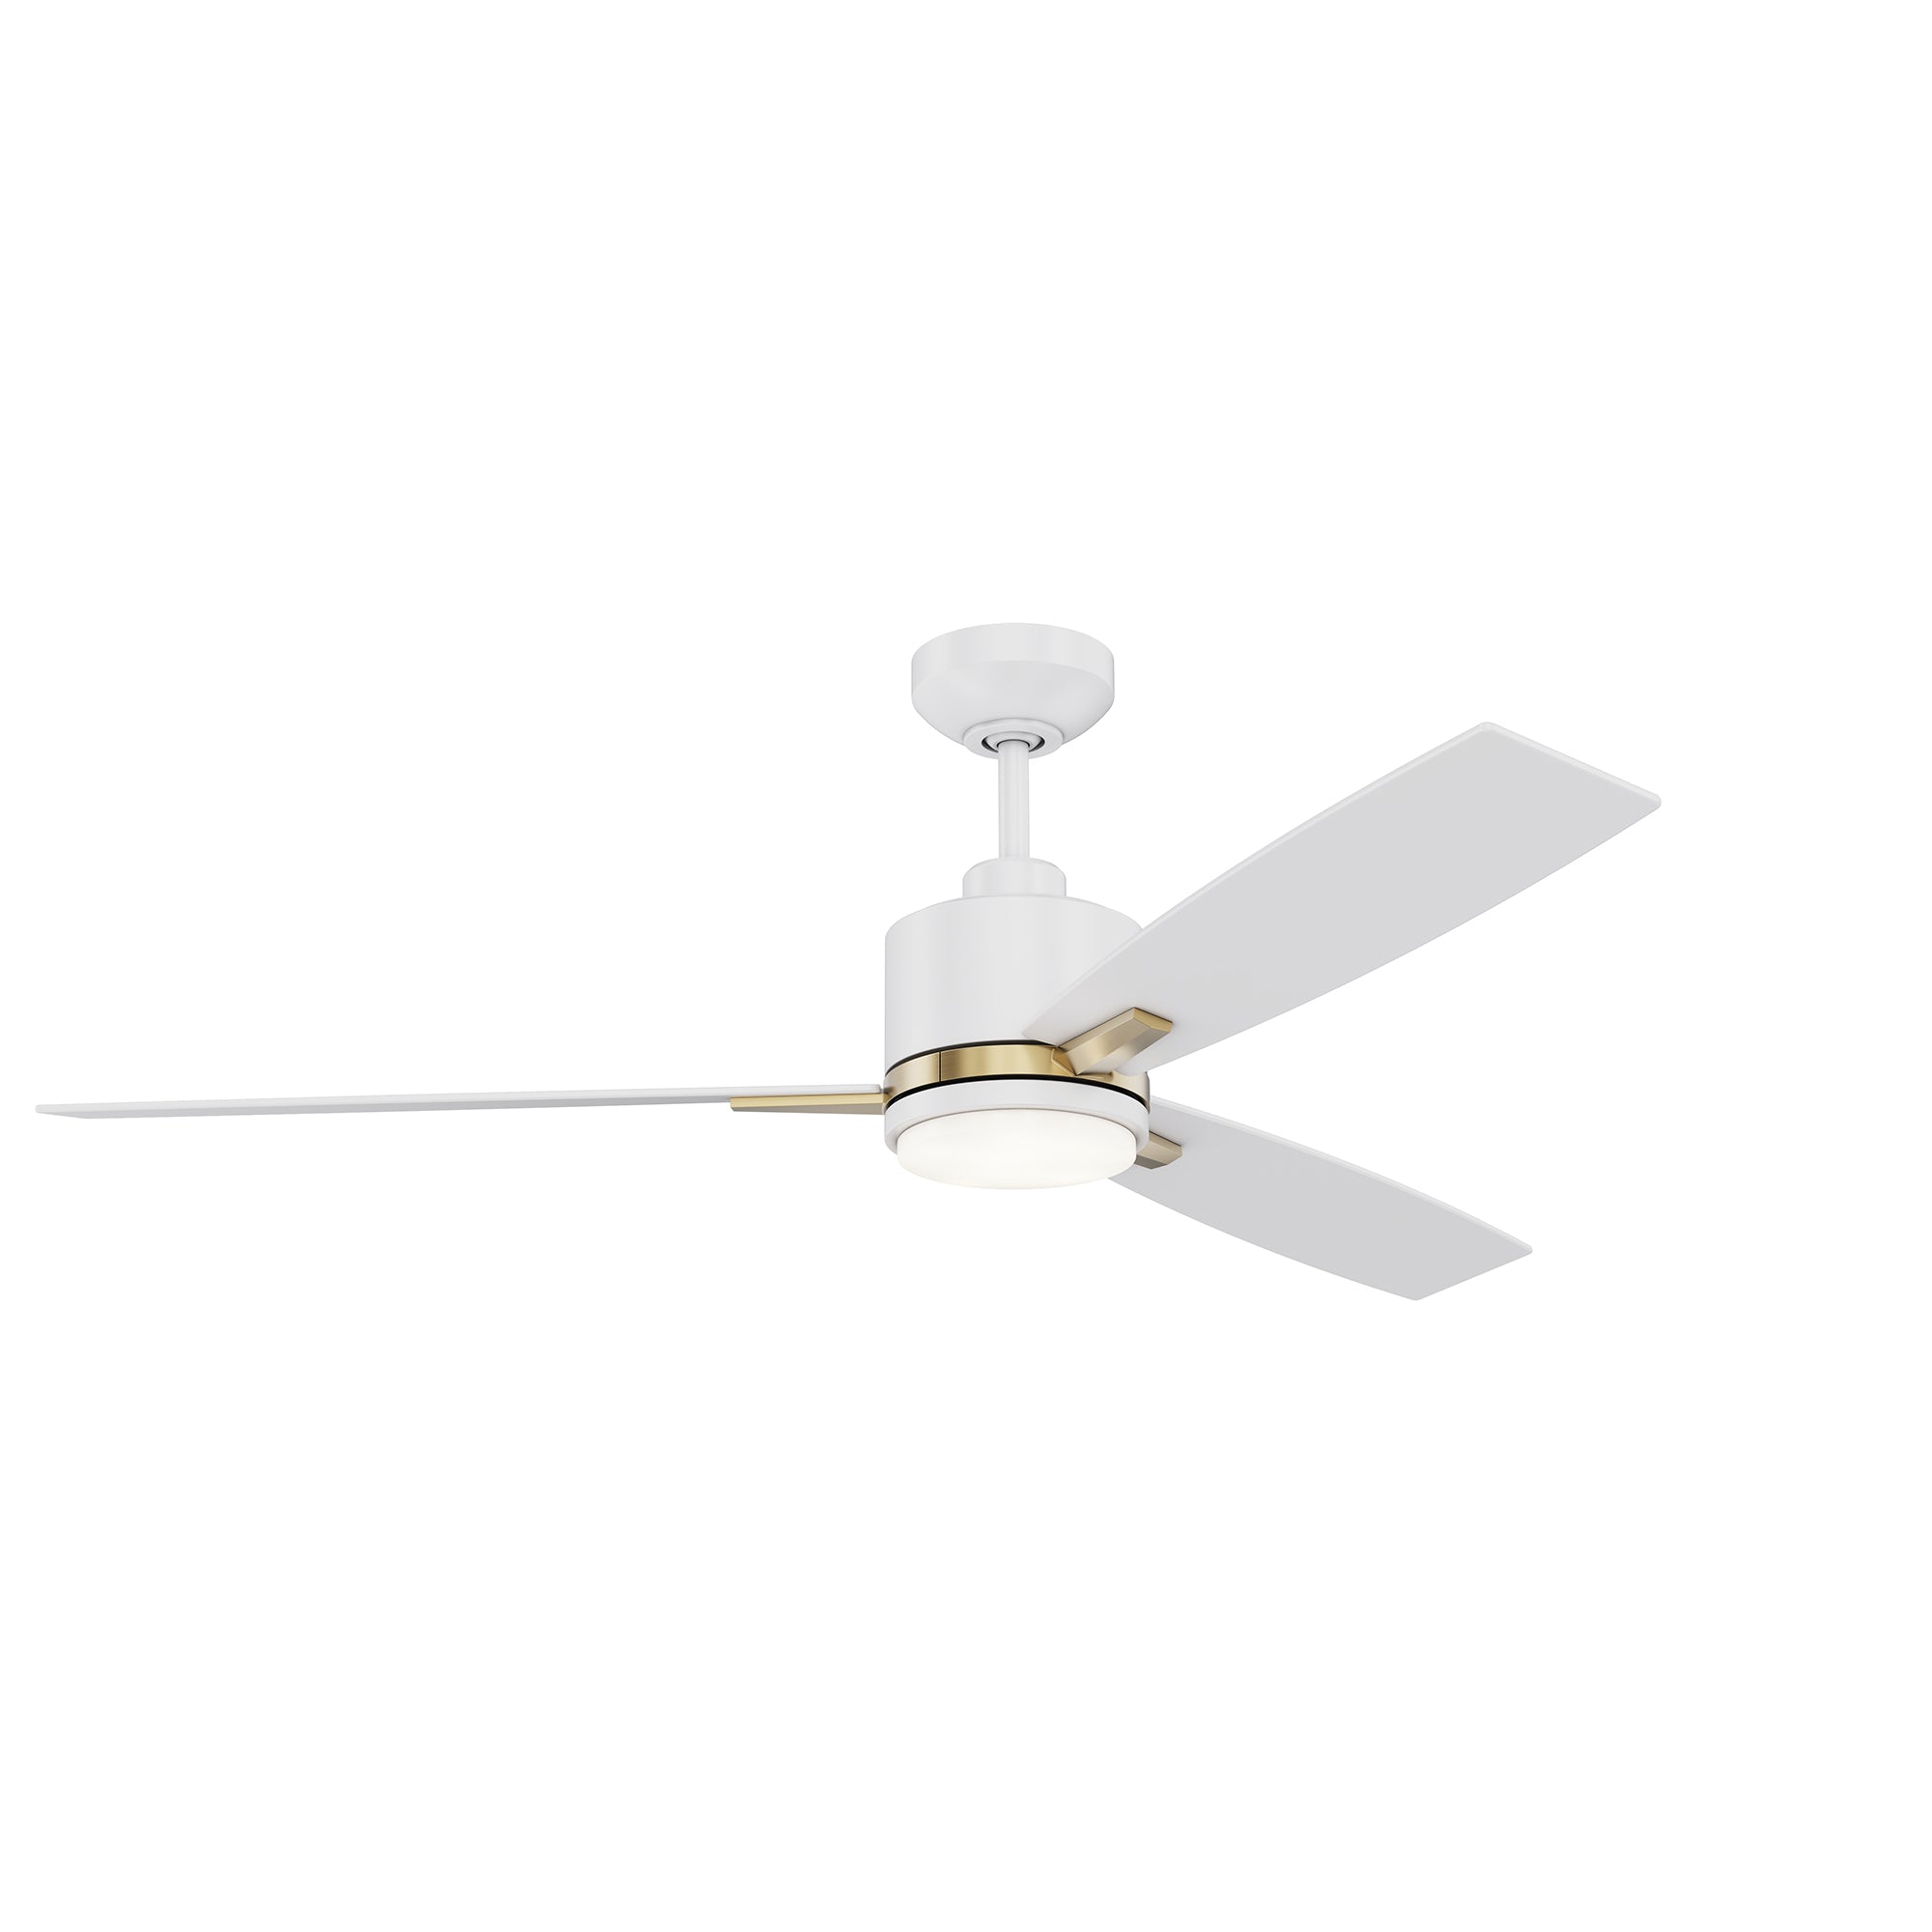 NUVEL Ceiling fan White, Gold INTEGRATED LED - AC30852-MWH/OCB | KENDAL